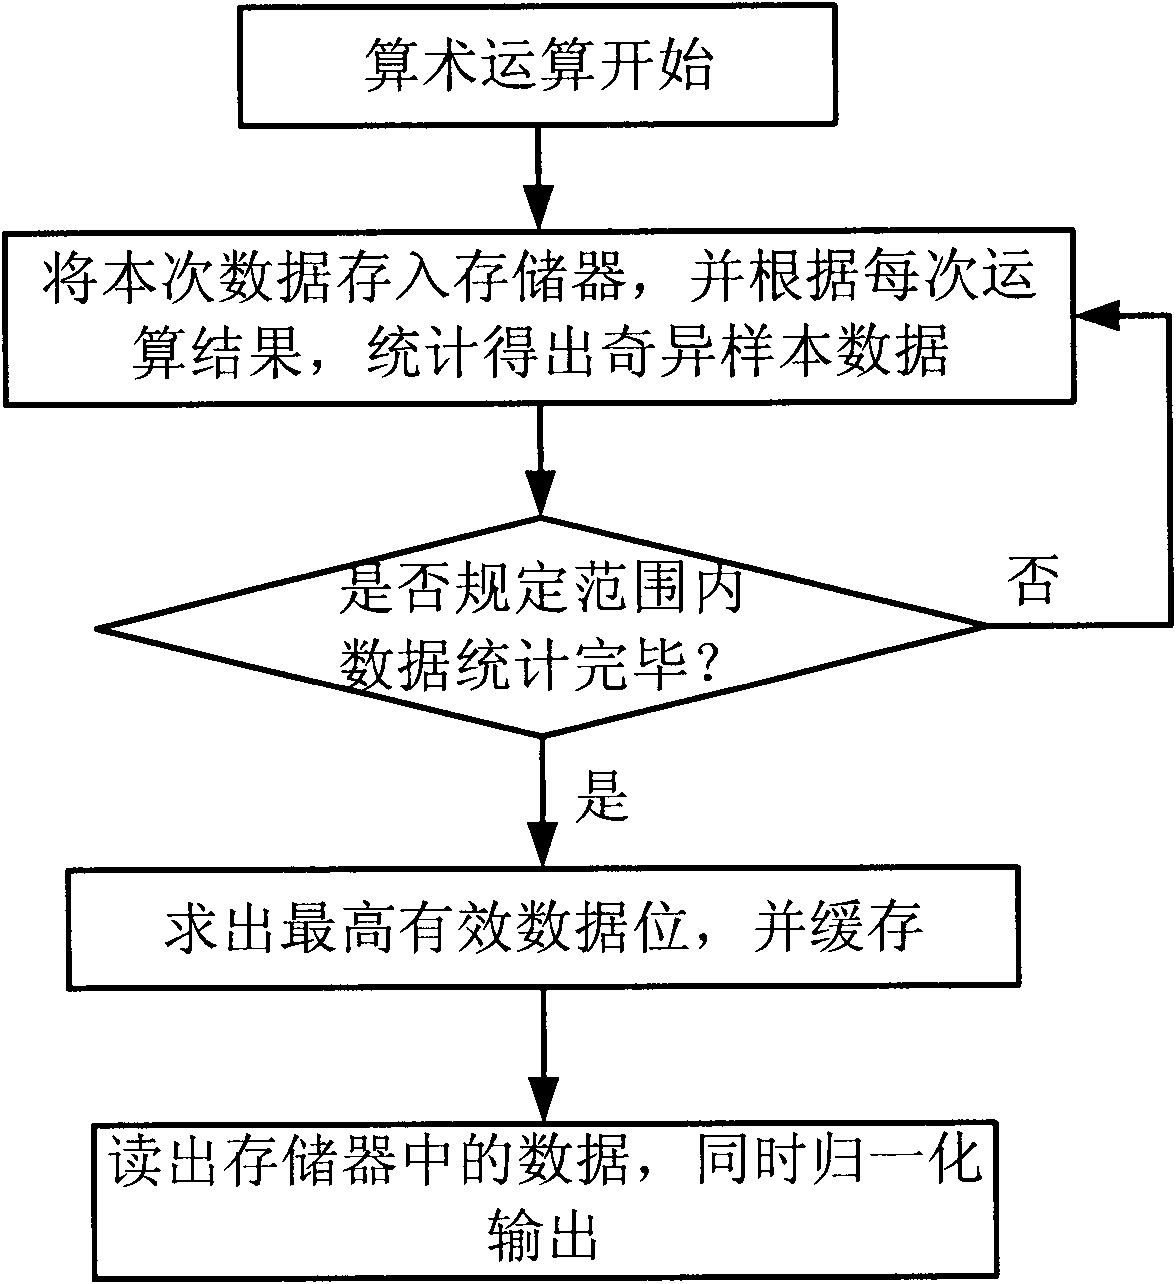 Method for performing data normalization processing by use of DMA (direct memory access) controller